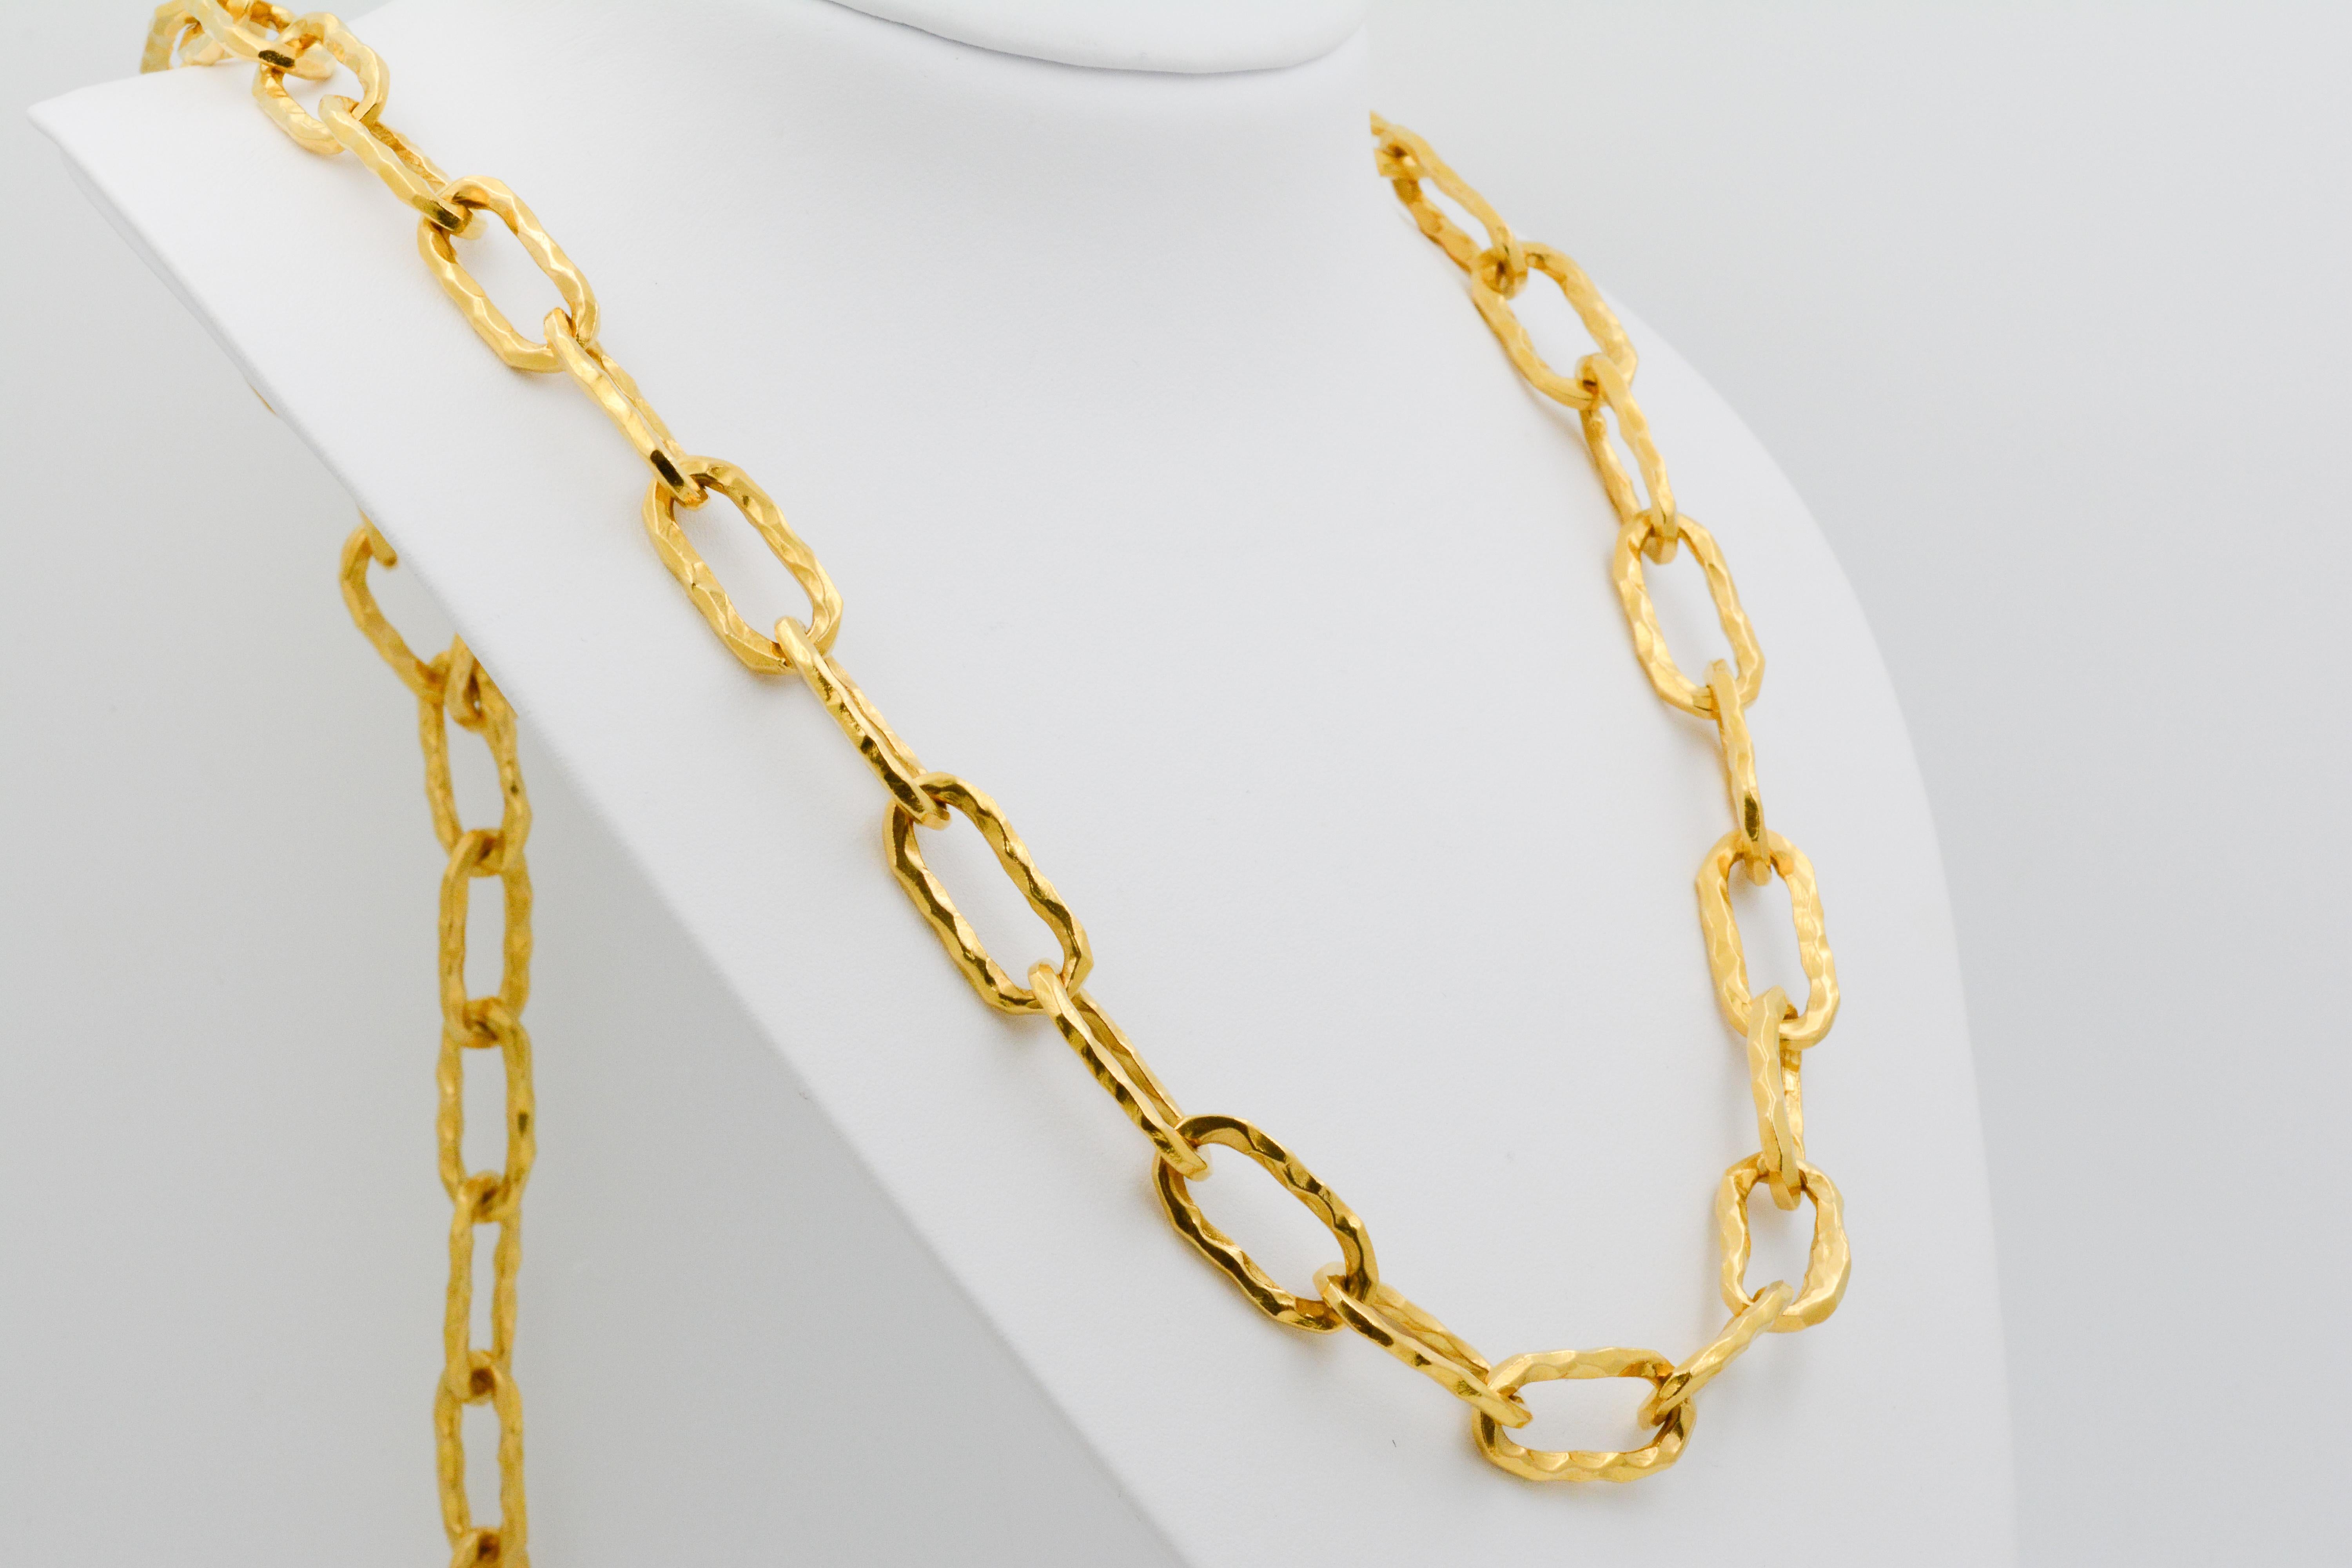 This signed Jean Mahie Cadene 22k yellow gold necklace is 32” long and its heaviness showcases its decadence. 